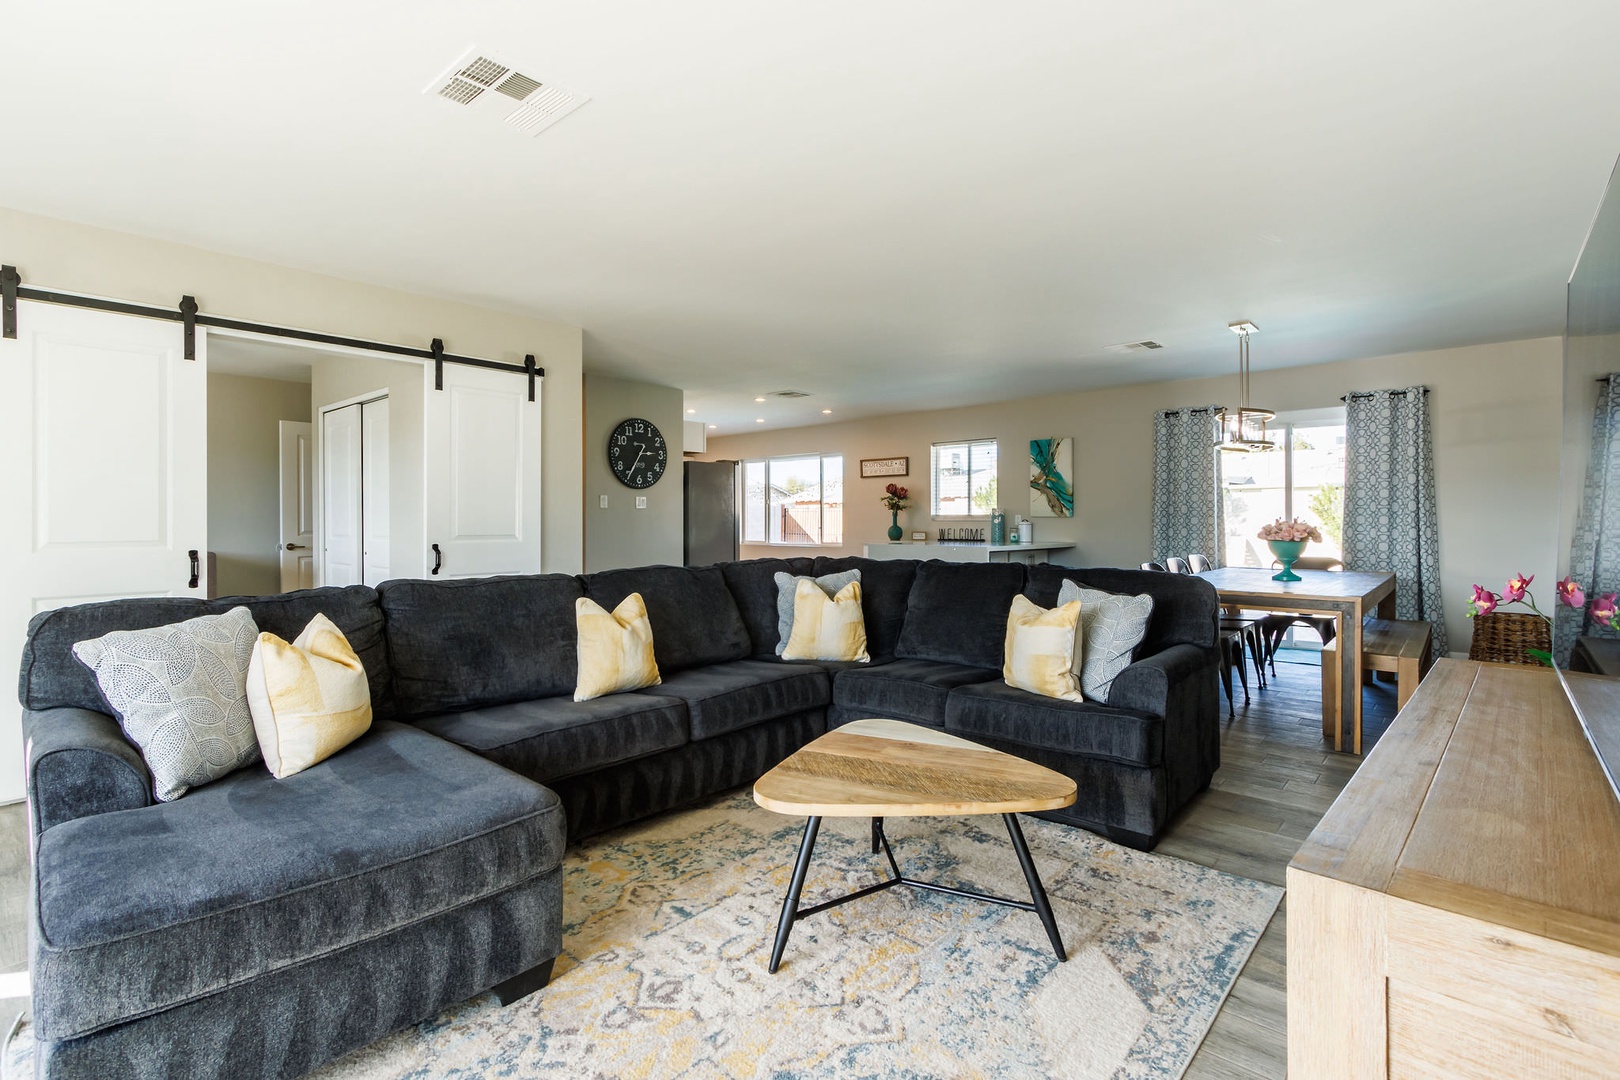 Spacious living area with ample seating